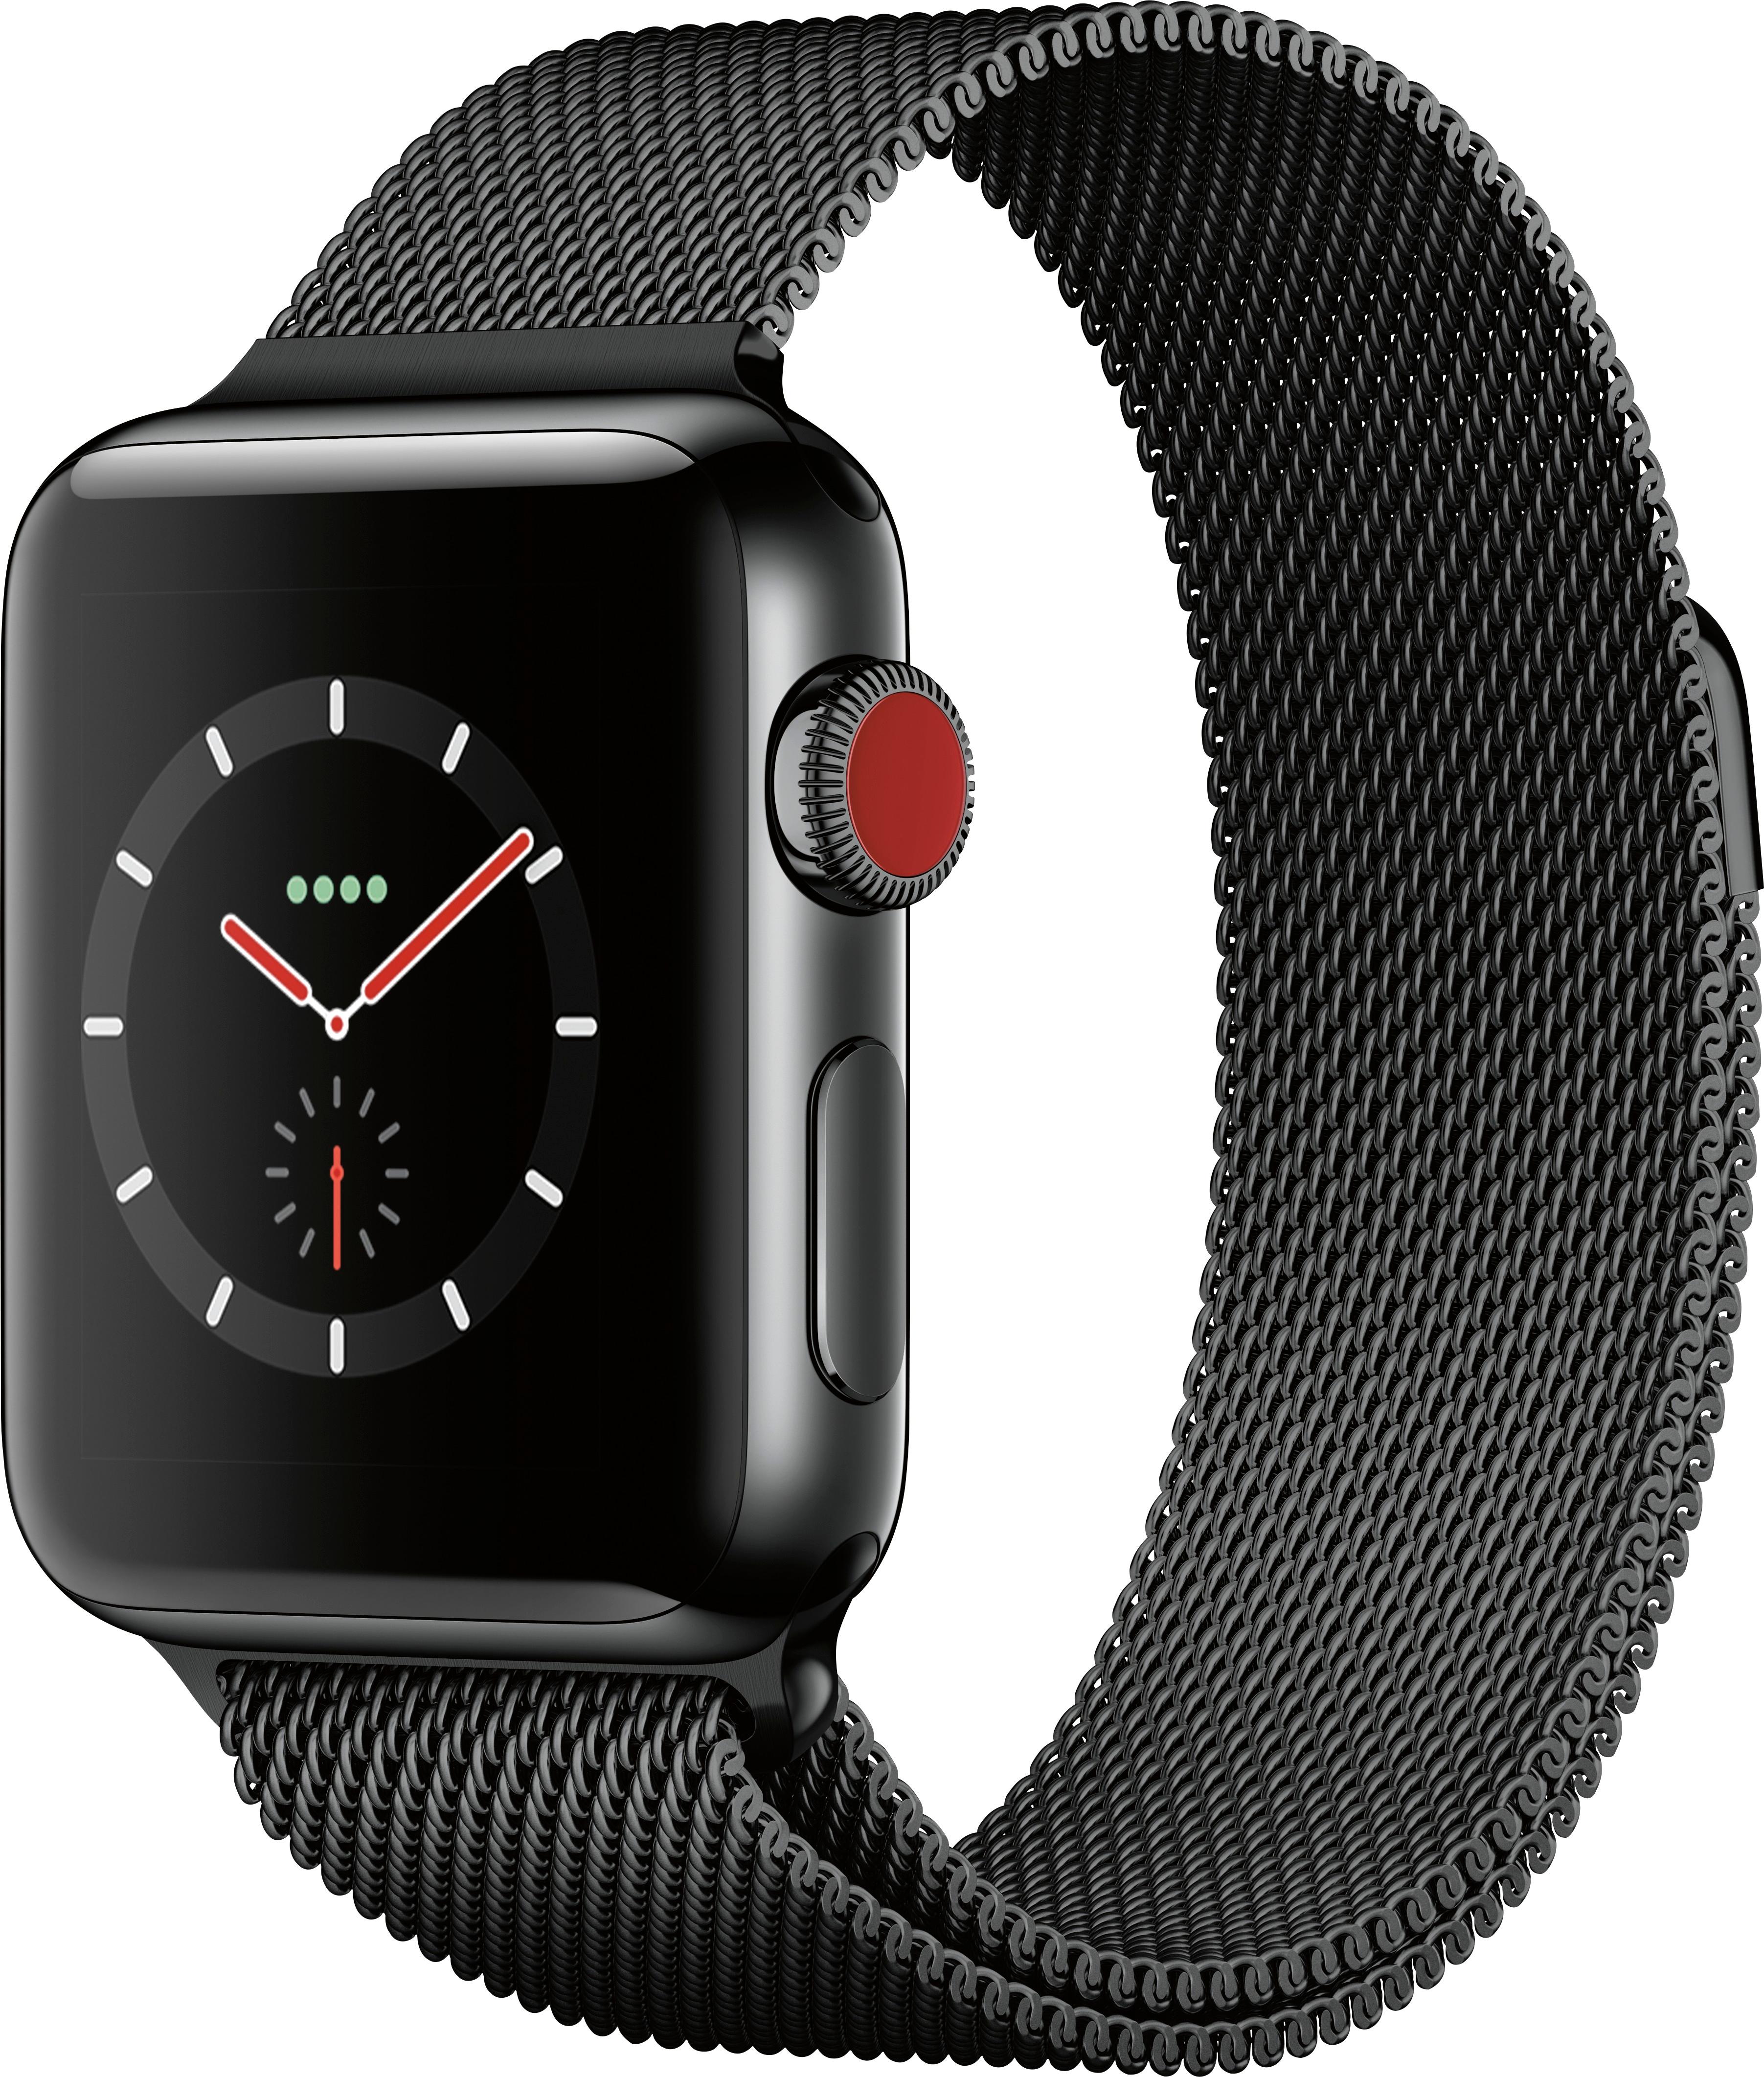 Apple Watch Series 3 Gps Cellular 38mm Space Black Stainless